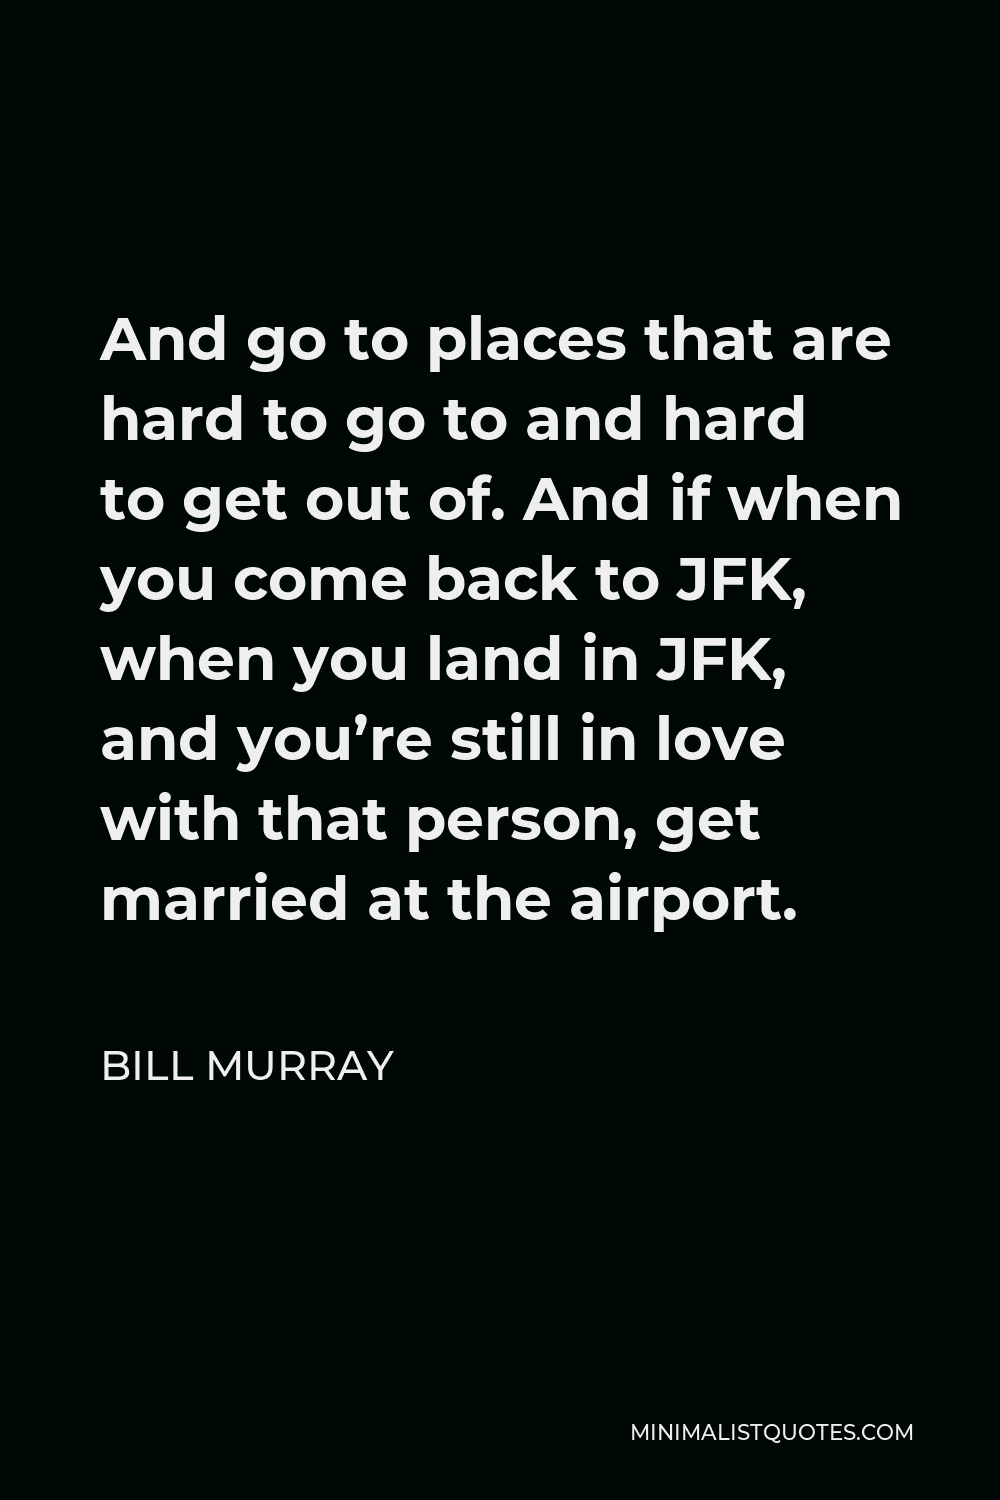 Bill Murray Quote - And go to places that are hard to go to and hard to get out of. And if when you come back to JFK, when you land in JFK, and you’re still in love with that person, get married at the airport.